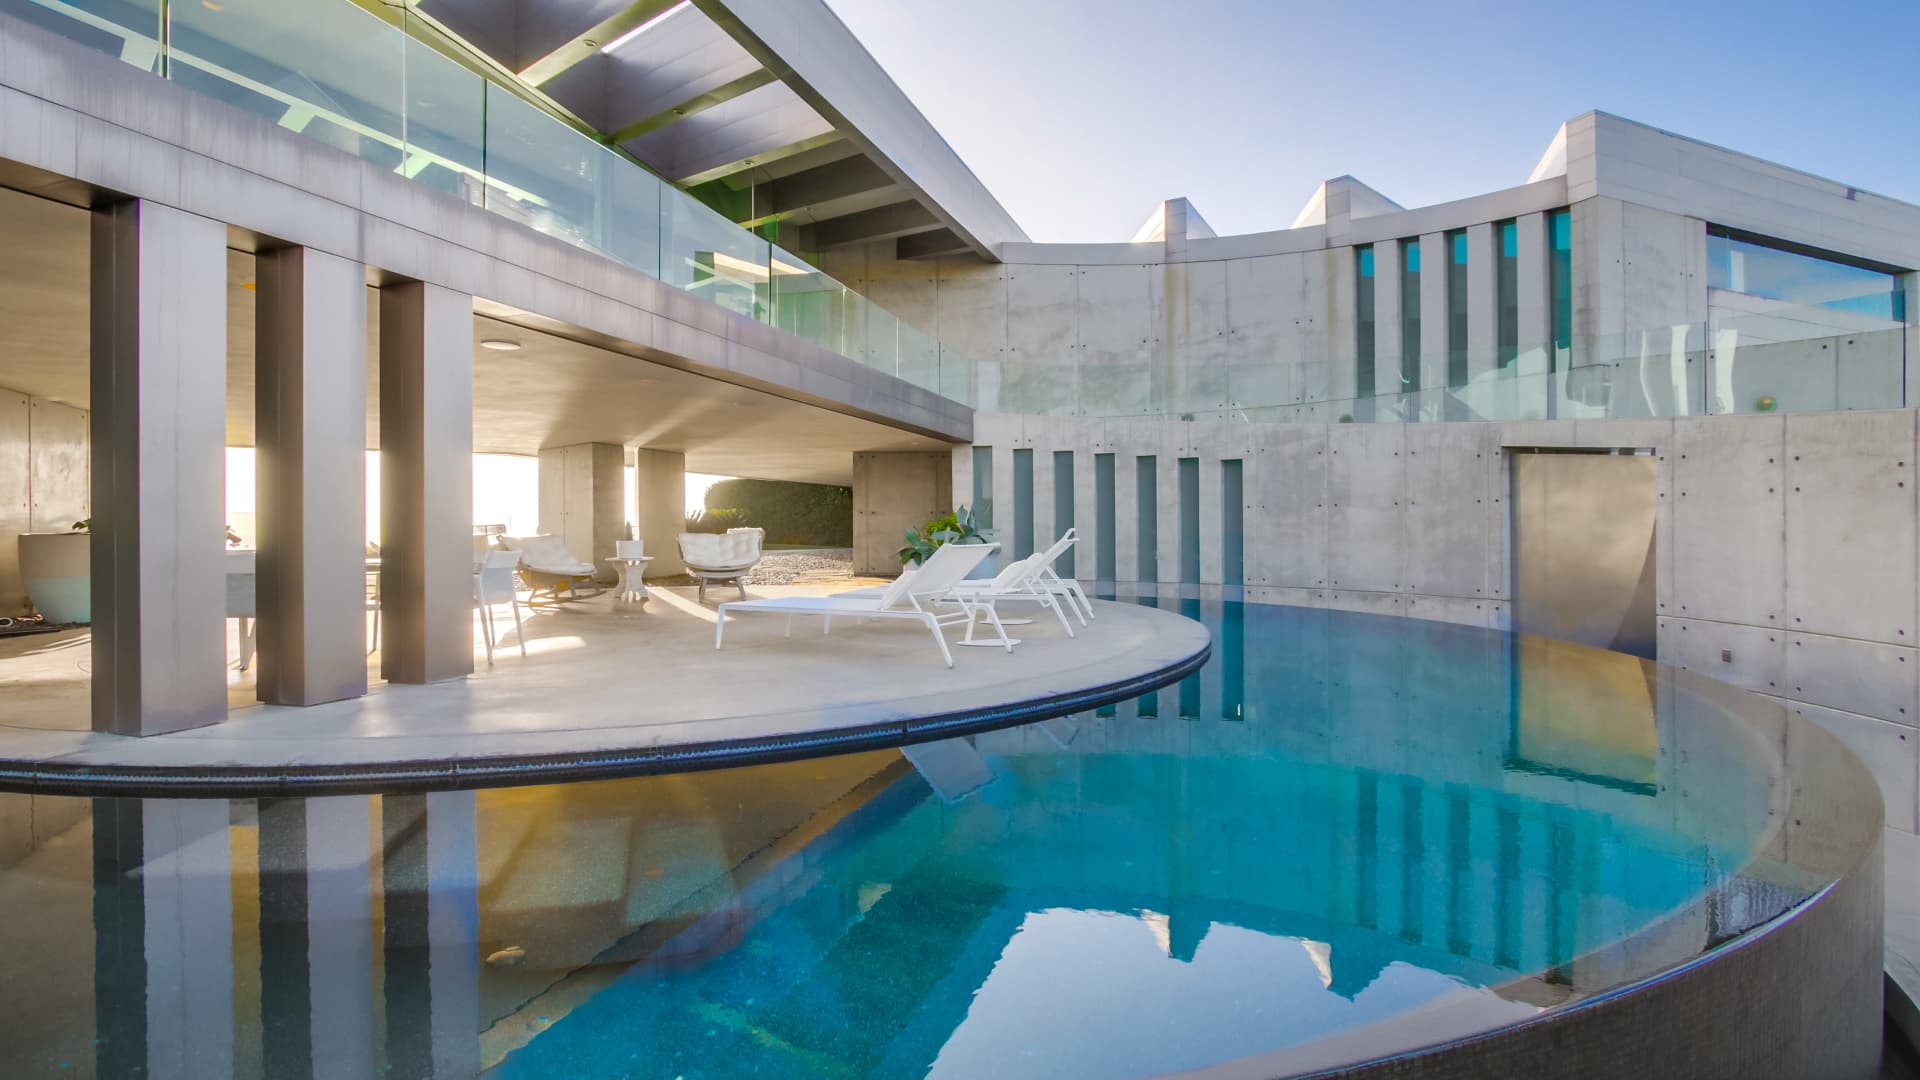 A crescent-moon shaped infinity pool wraps around a circular terrace.